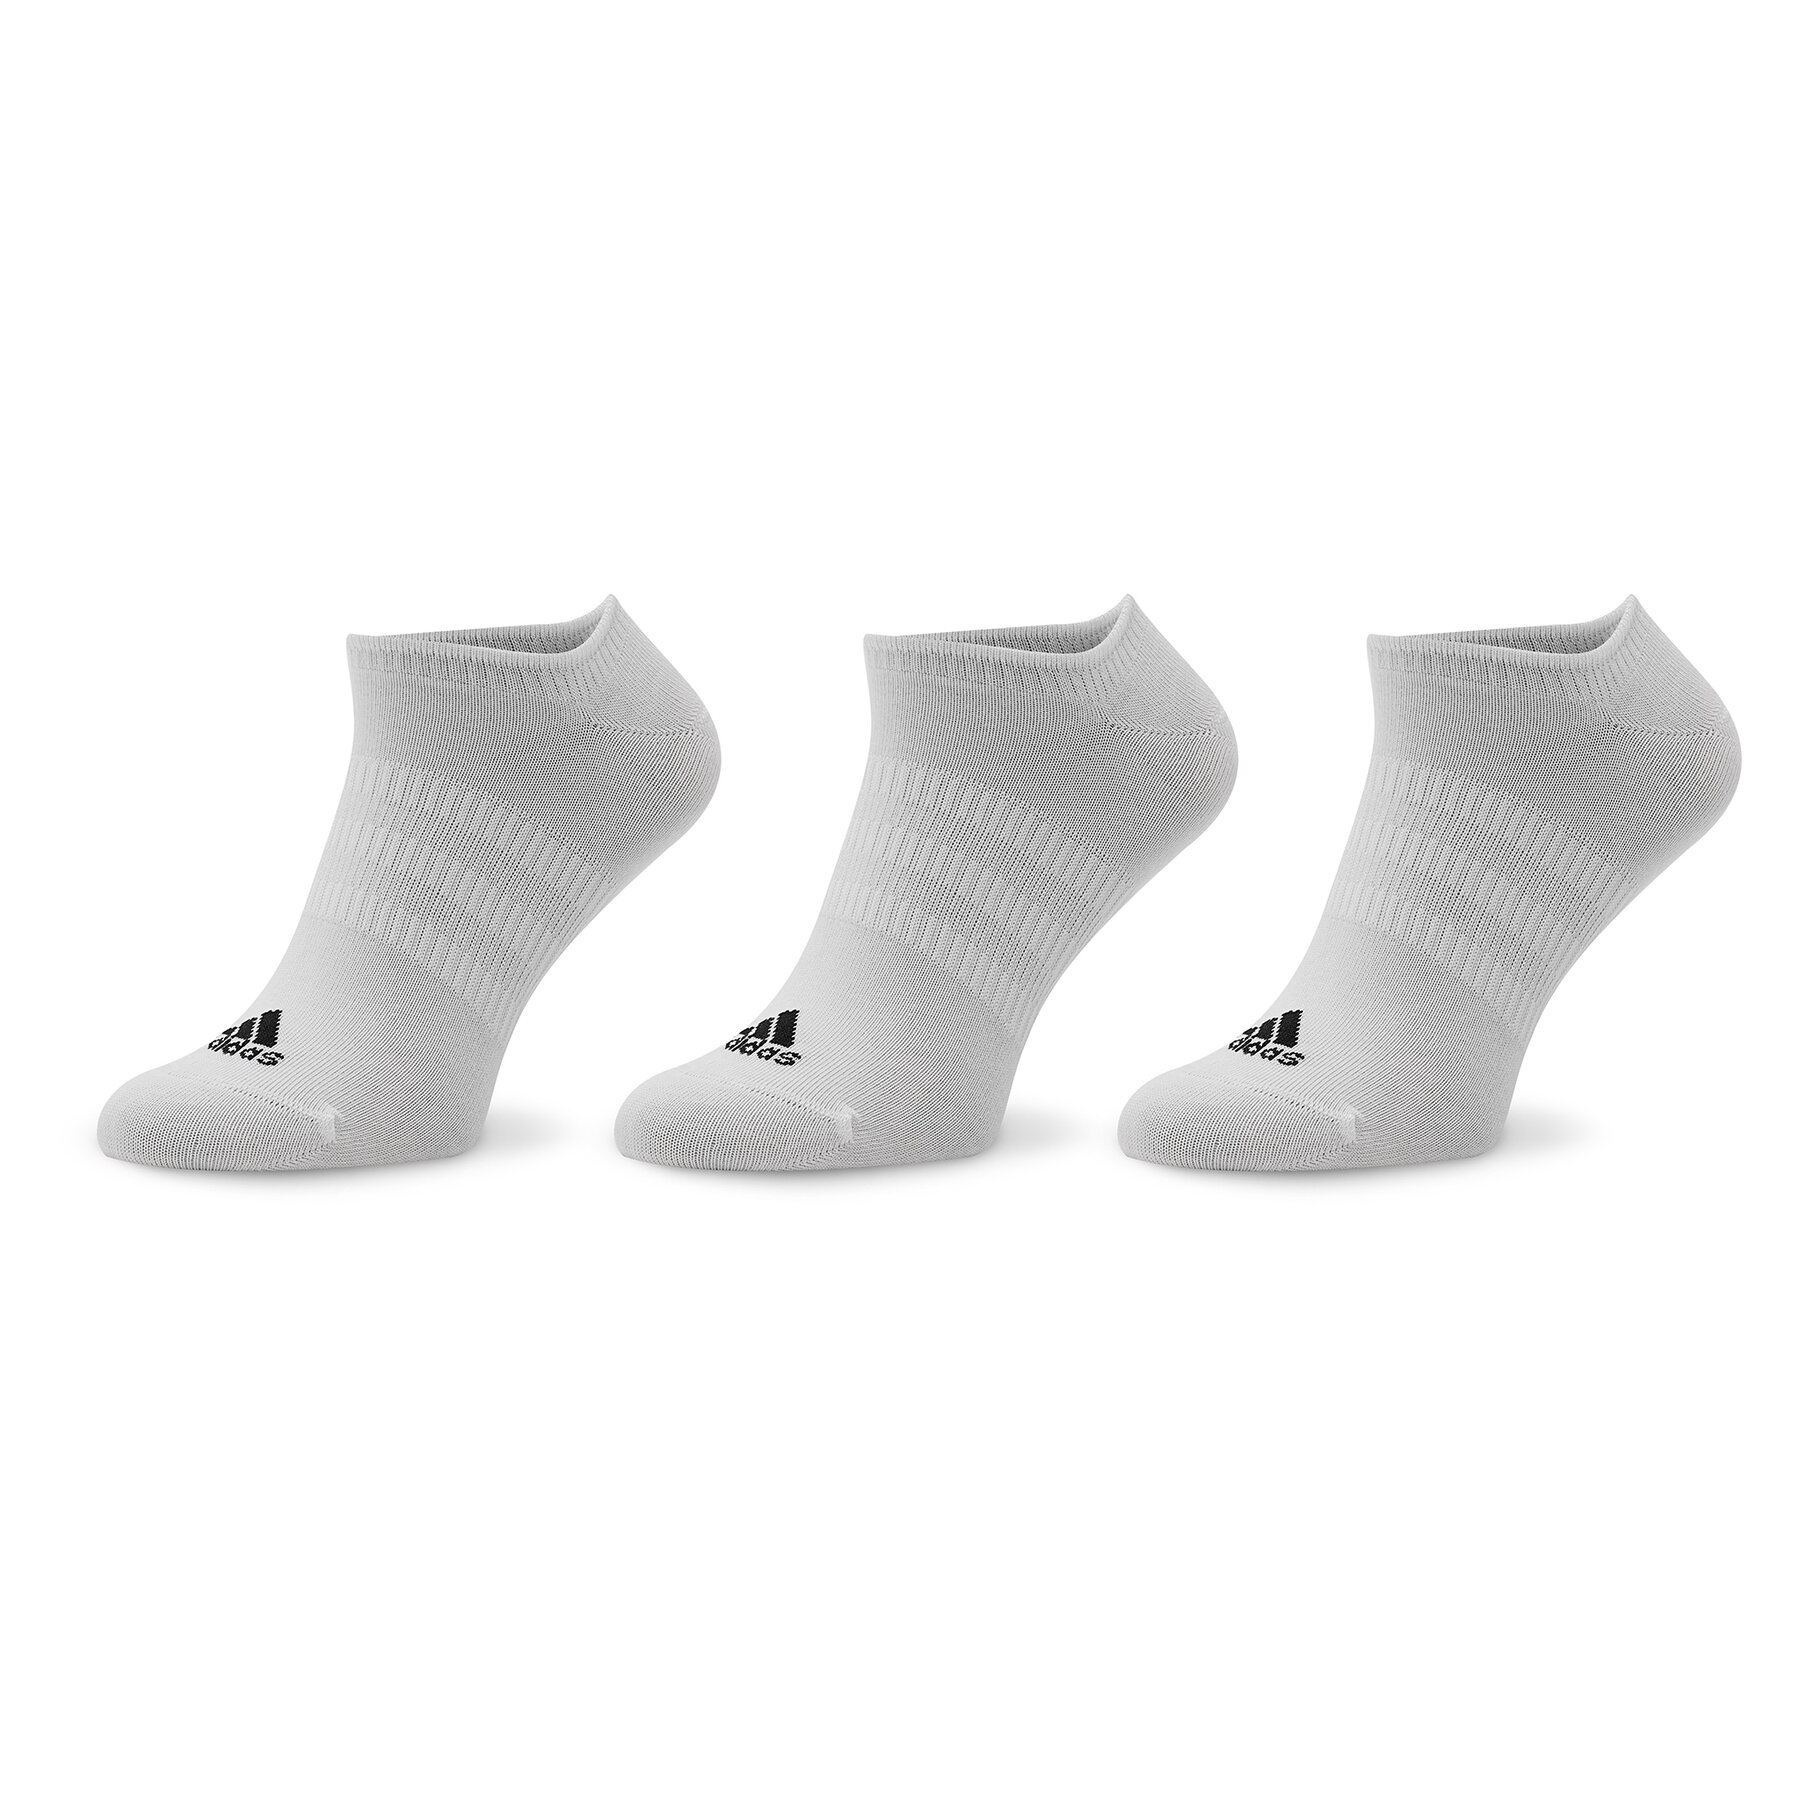 Socquettes unisex adidas Thin and Light No-Show Socks 3 Pairs HT3463 Blanc